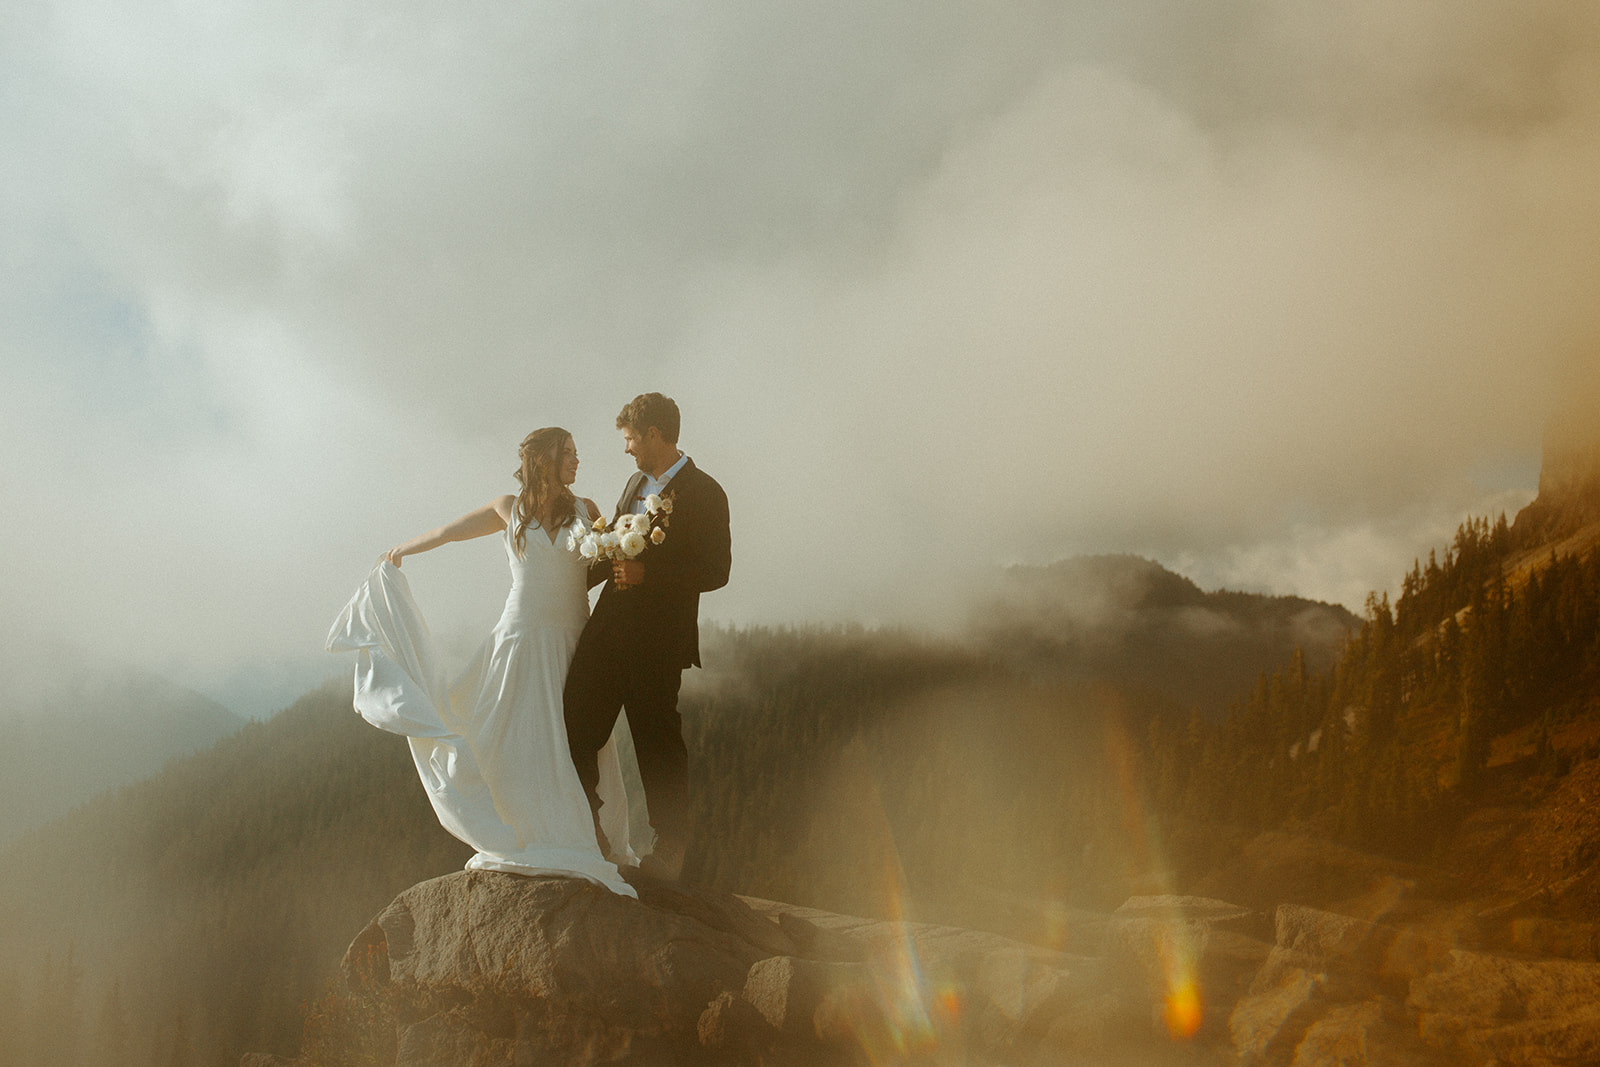 Couple elope in a national park with fog hovering over the mountains in the background.